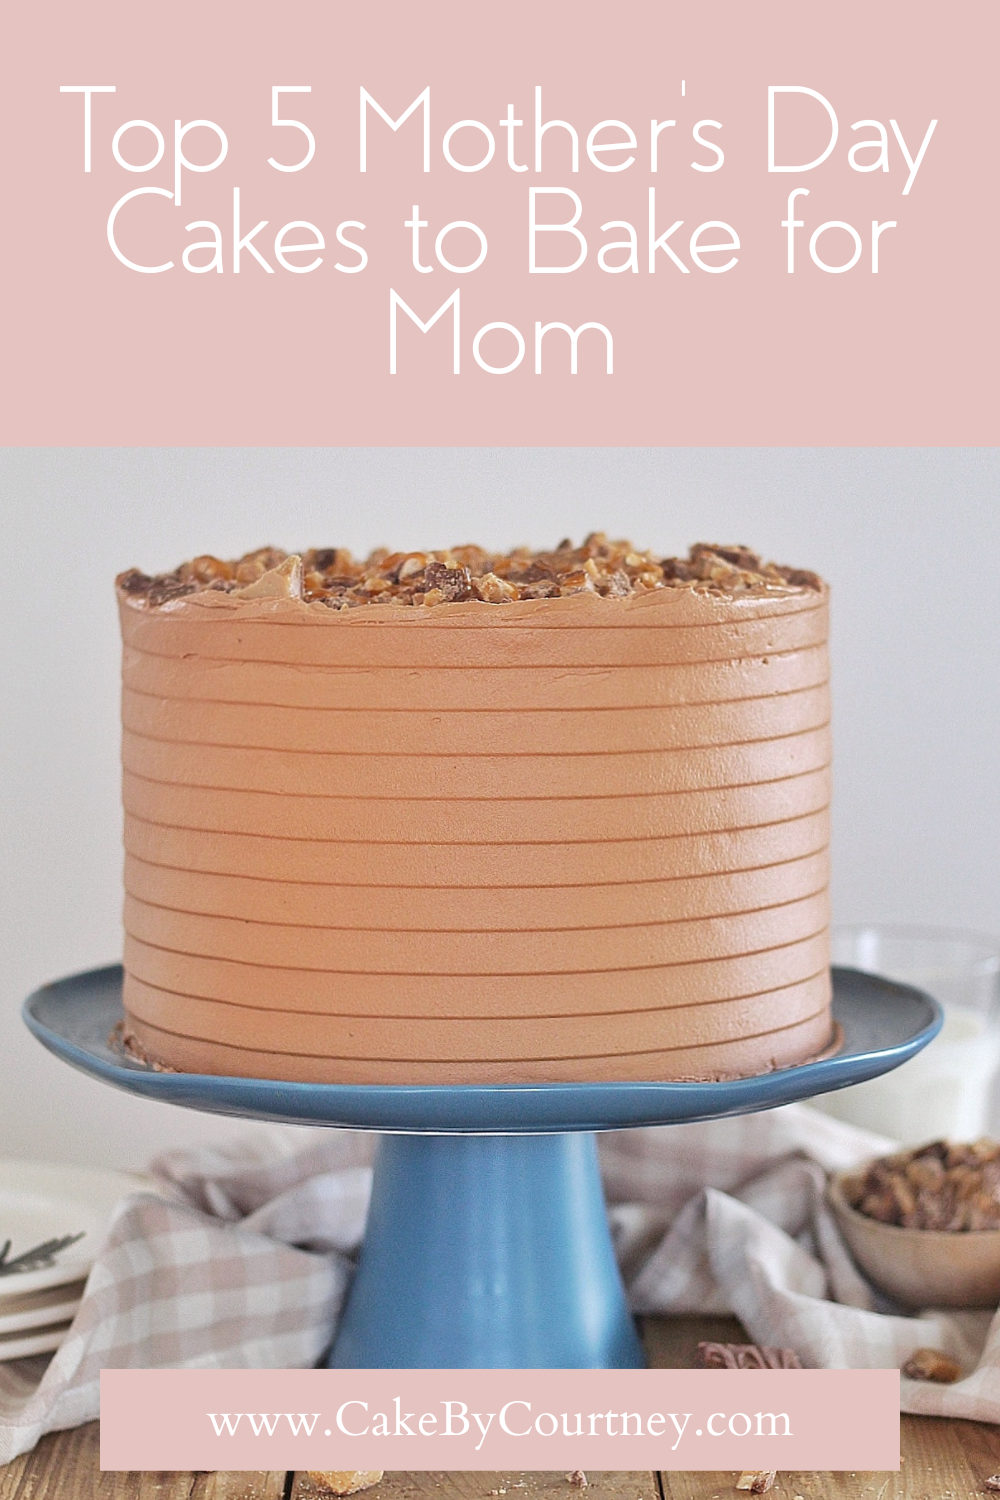 top 5 mother's day cakes to bake for mom. www.cakebycourtney.com